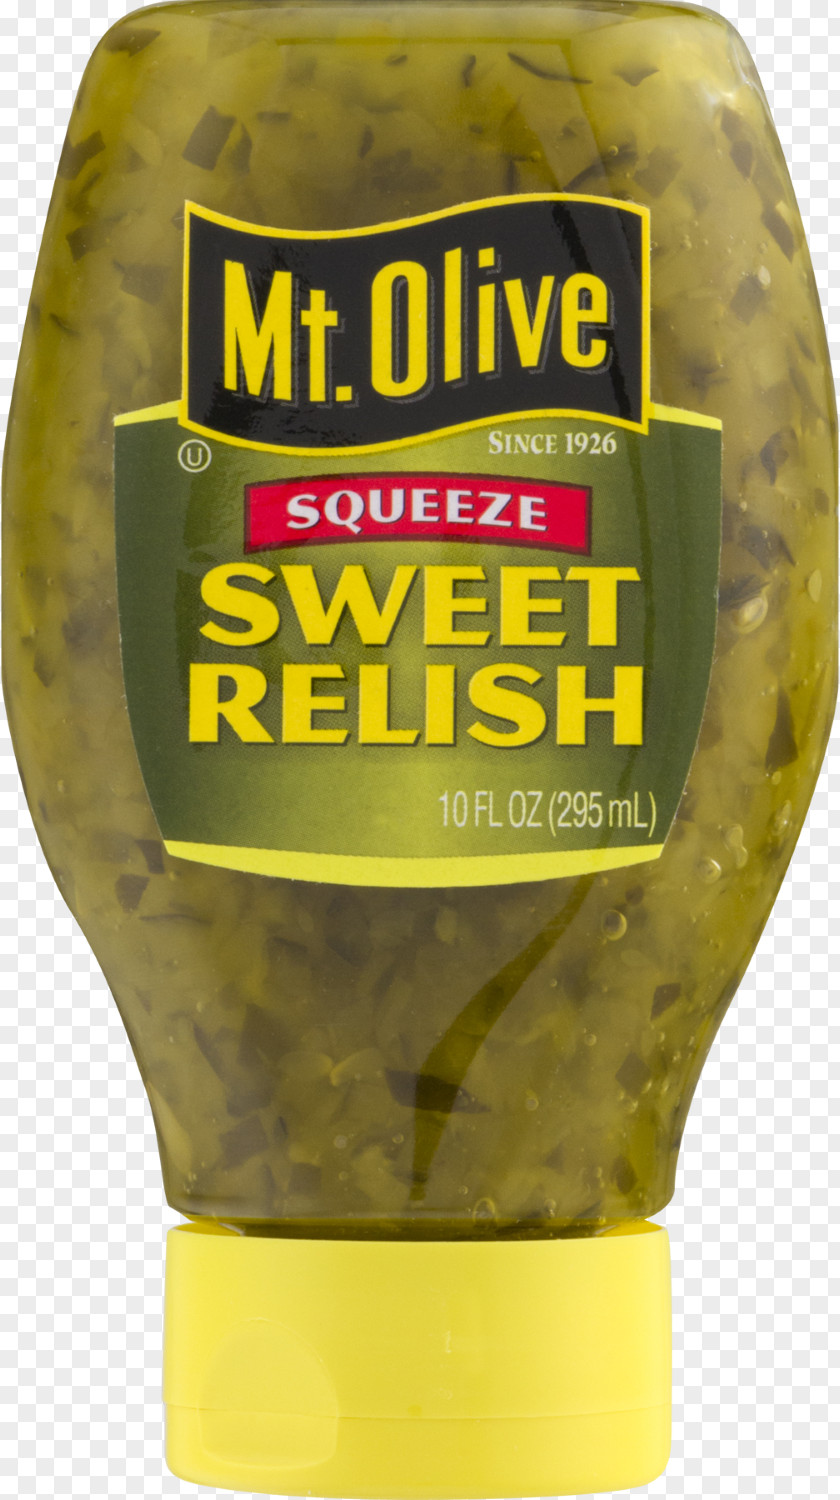 Hot Dog Pickled Cucumber Condiment Relish Mt. Olive Pickle Company PNG